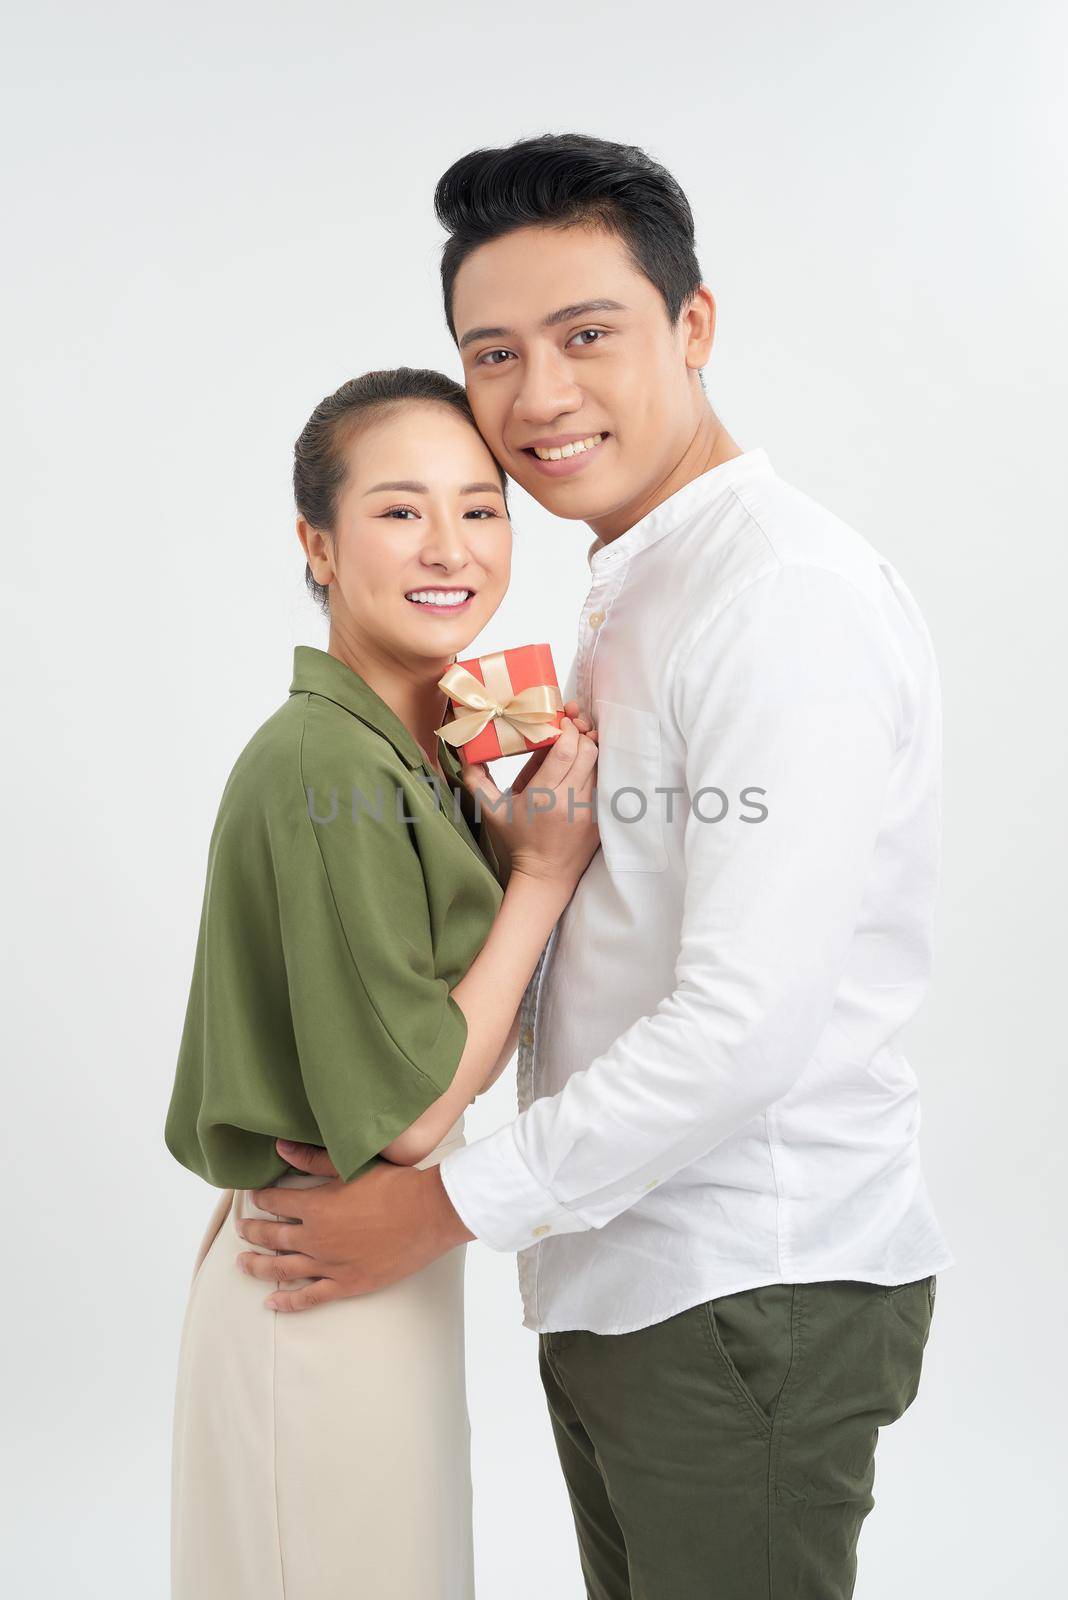 Happy Young Couple with Valentine's Day Present isolated on a White background.